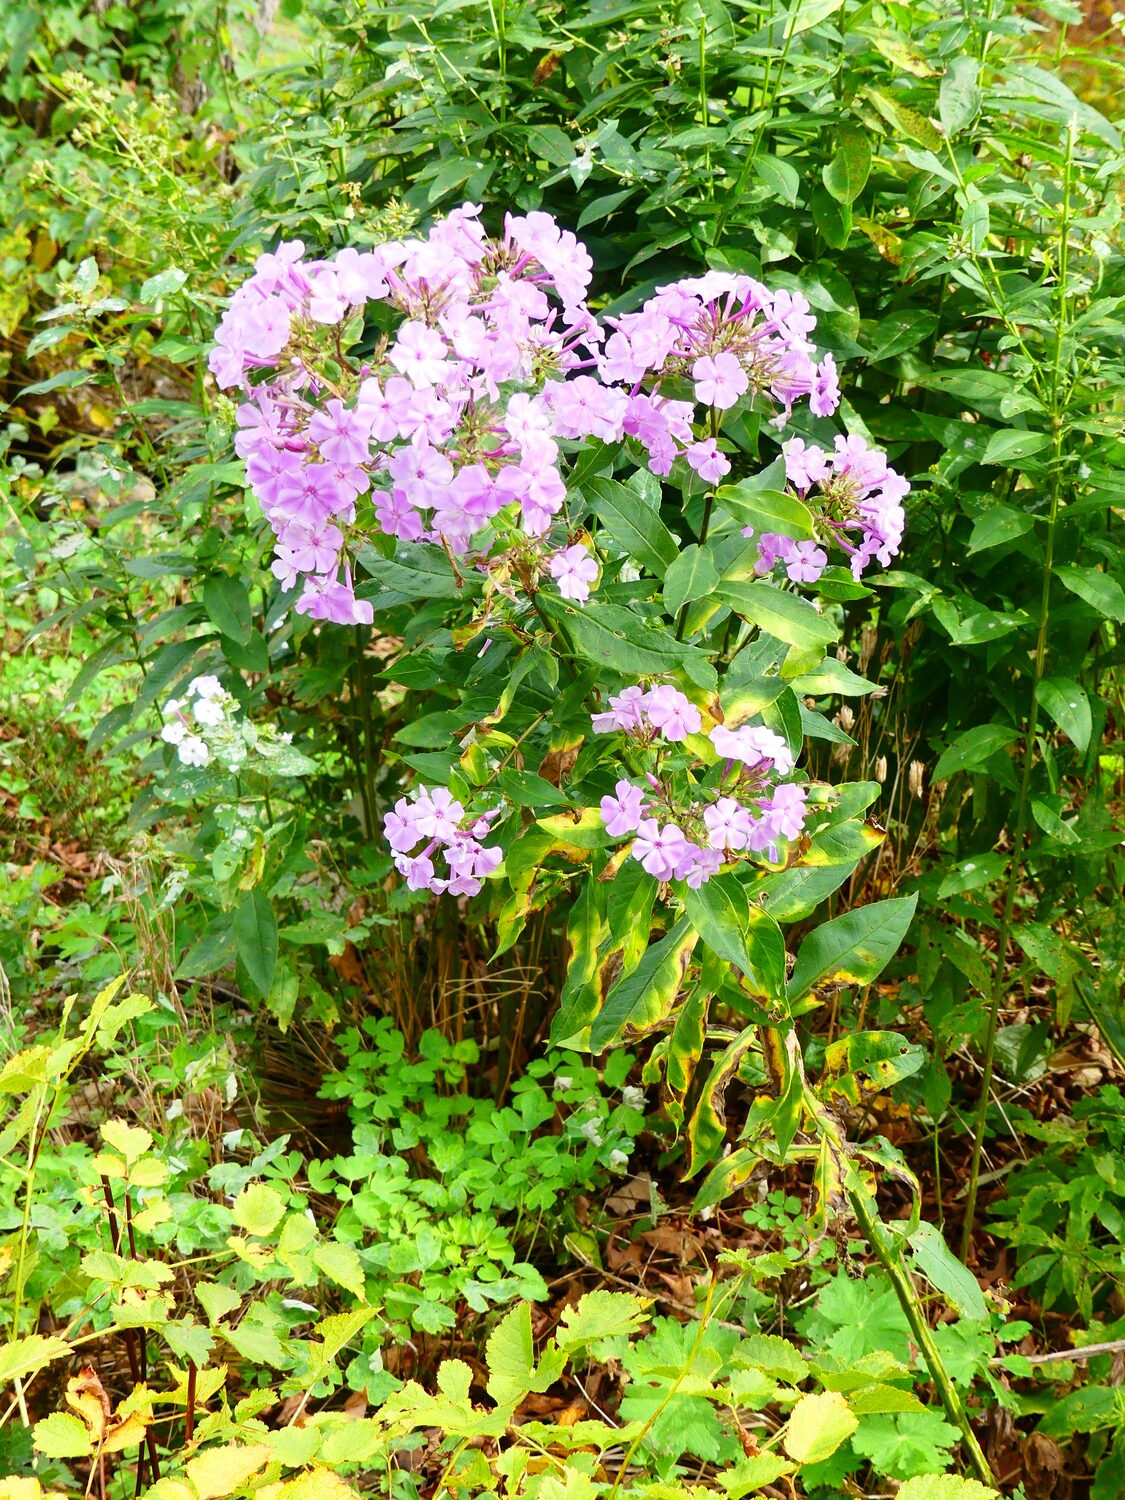 Once called fall phlox, the older, traditional Phlox paniculata flowers in September and October with long stems and lightly scented blooms. Unsightly foliage is easily trimmed away from the long stems, which can be cut to size as needed.  ANDREW MESSINGER